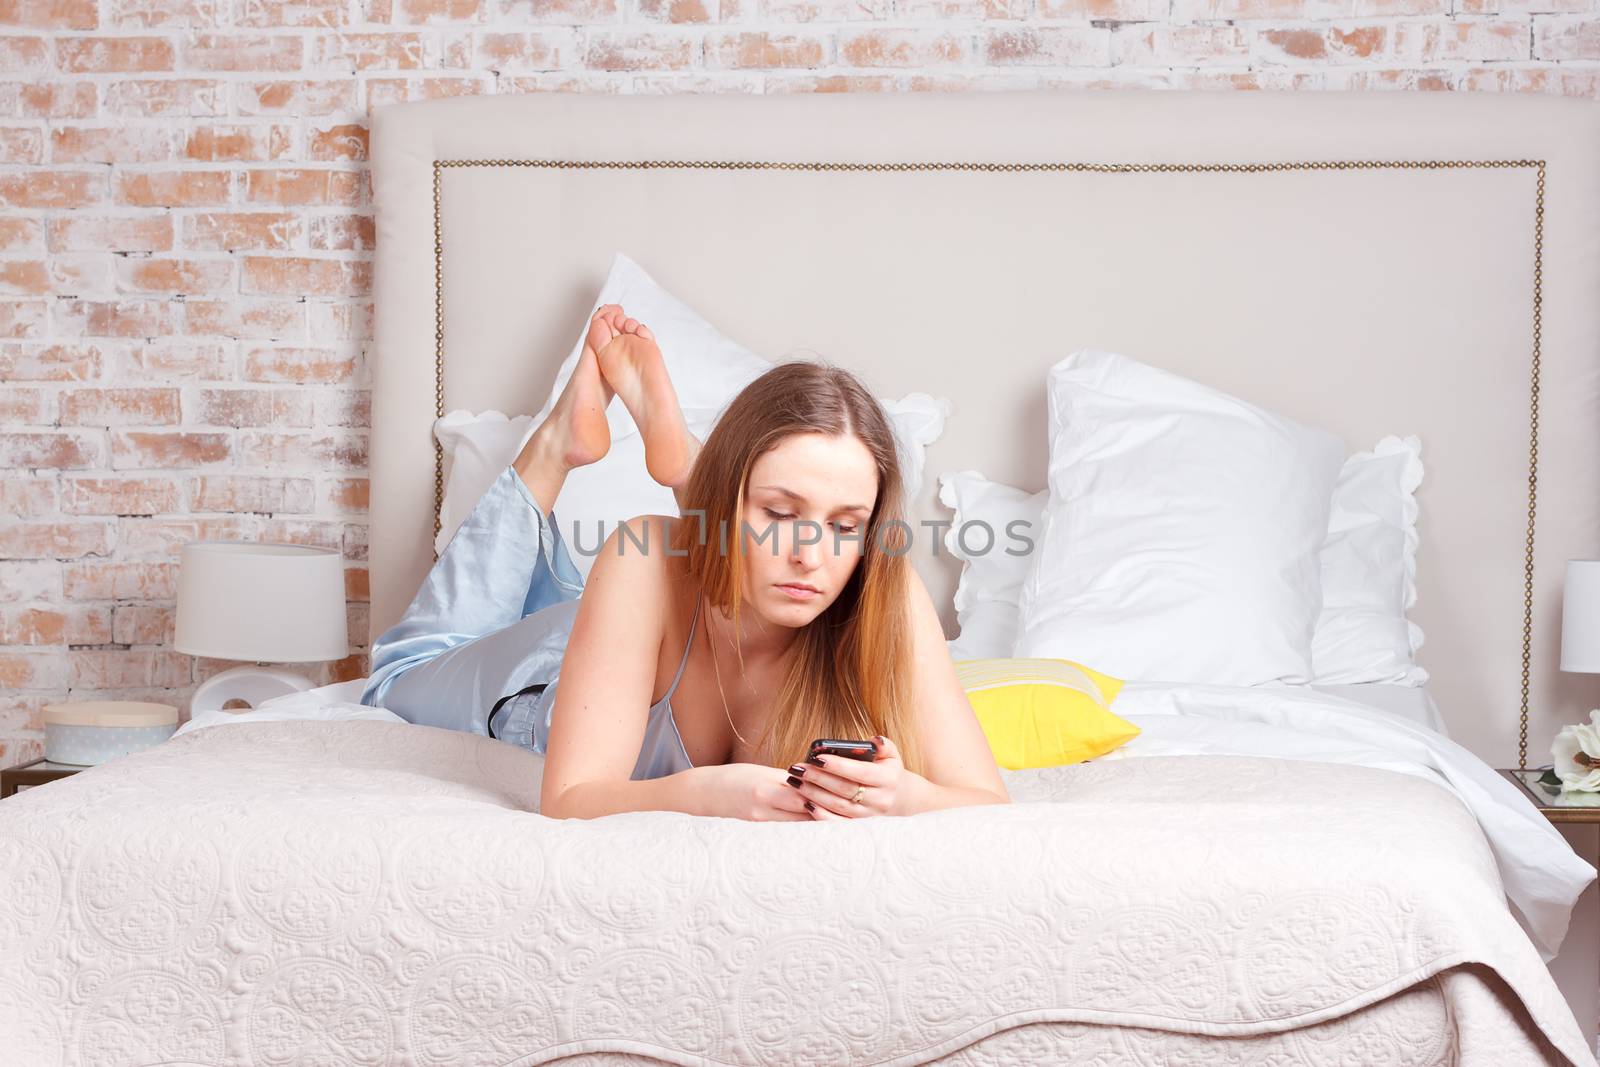 Young woman using smartphone on the bed by victosha